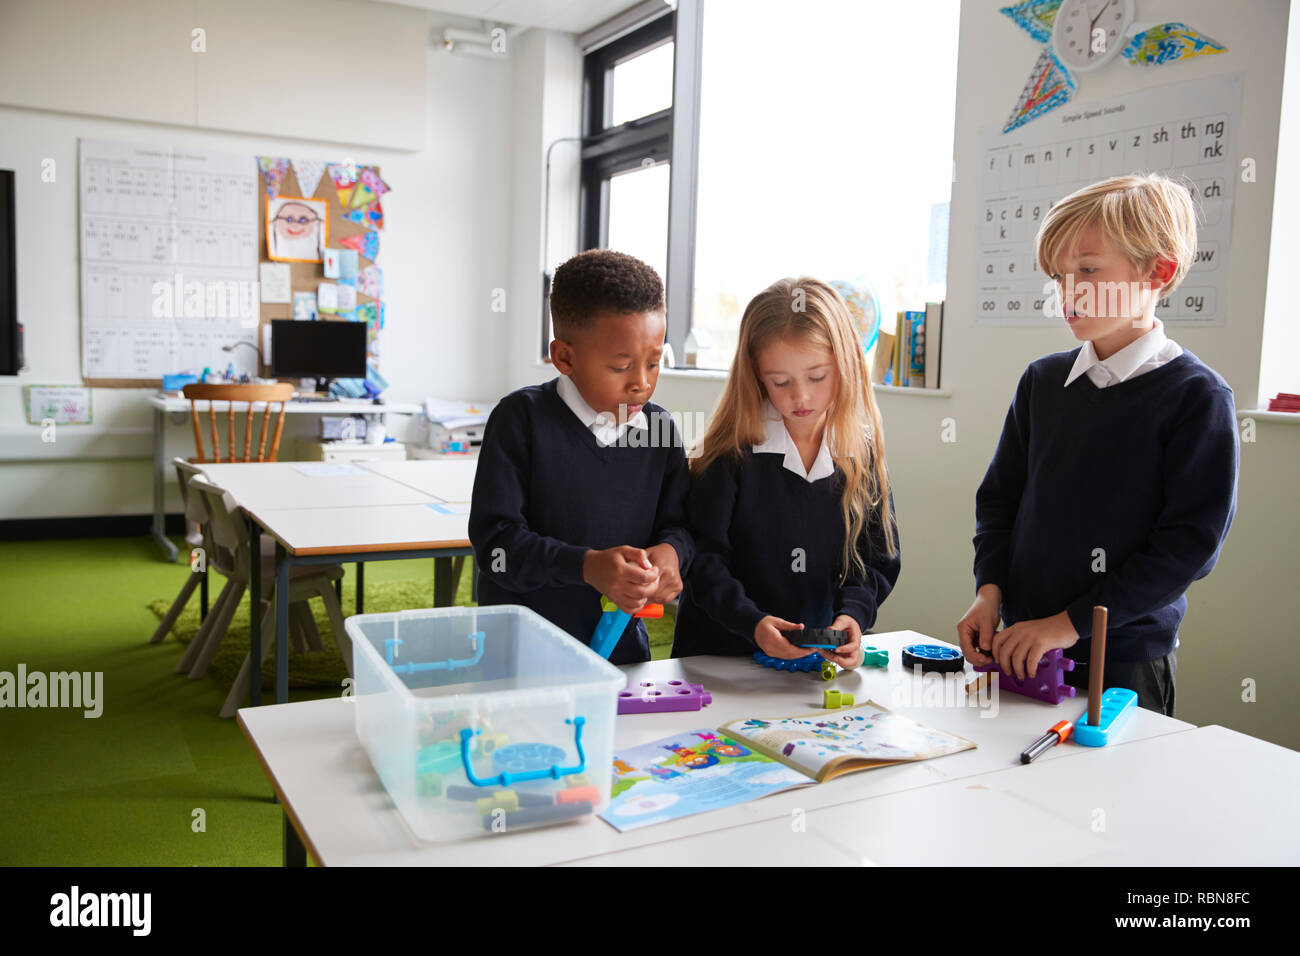 A girl and two boys standing at a table in a primary school classroom working together with toy construction blocks Stock Photo